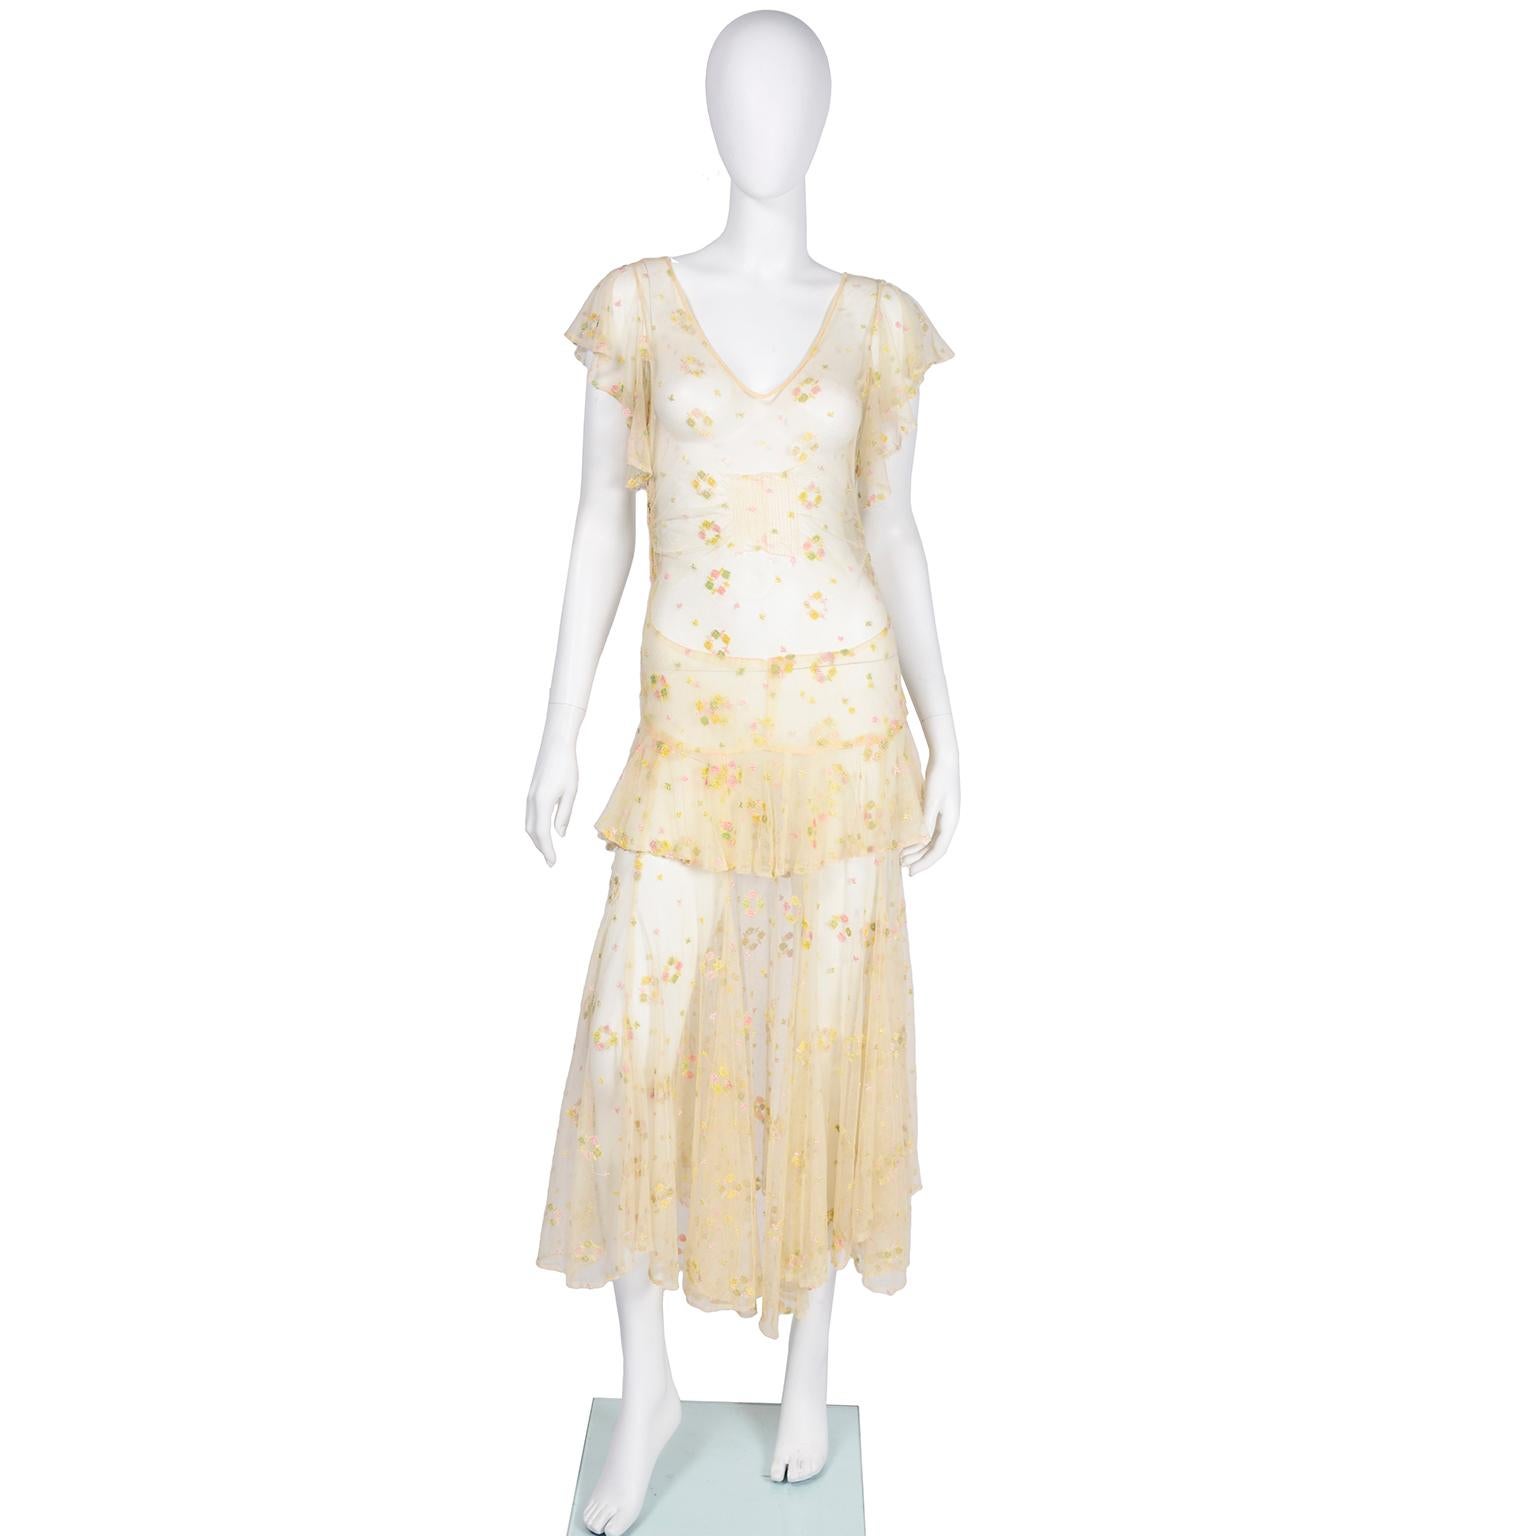 This dress is so incredible! It is made of a sheer creamy beige rayon or silk net with pastel embroidered flowers throughout dress. The  embroidery is various shades of pink, yellow, and gree and the dress has butterfly sleeves, a. V-neck and ribbed